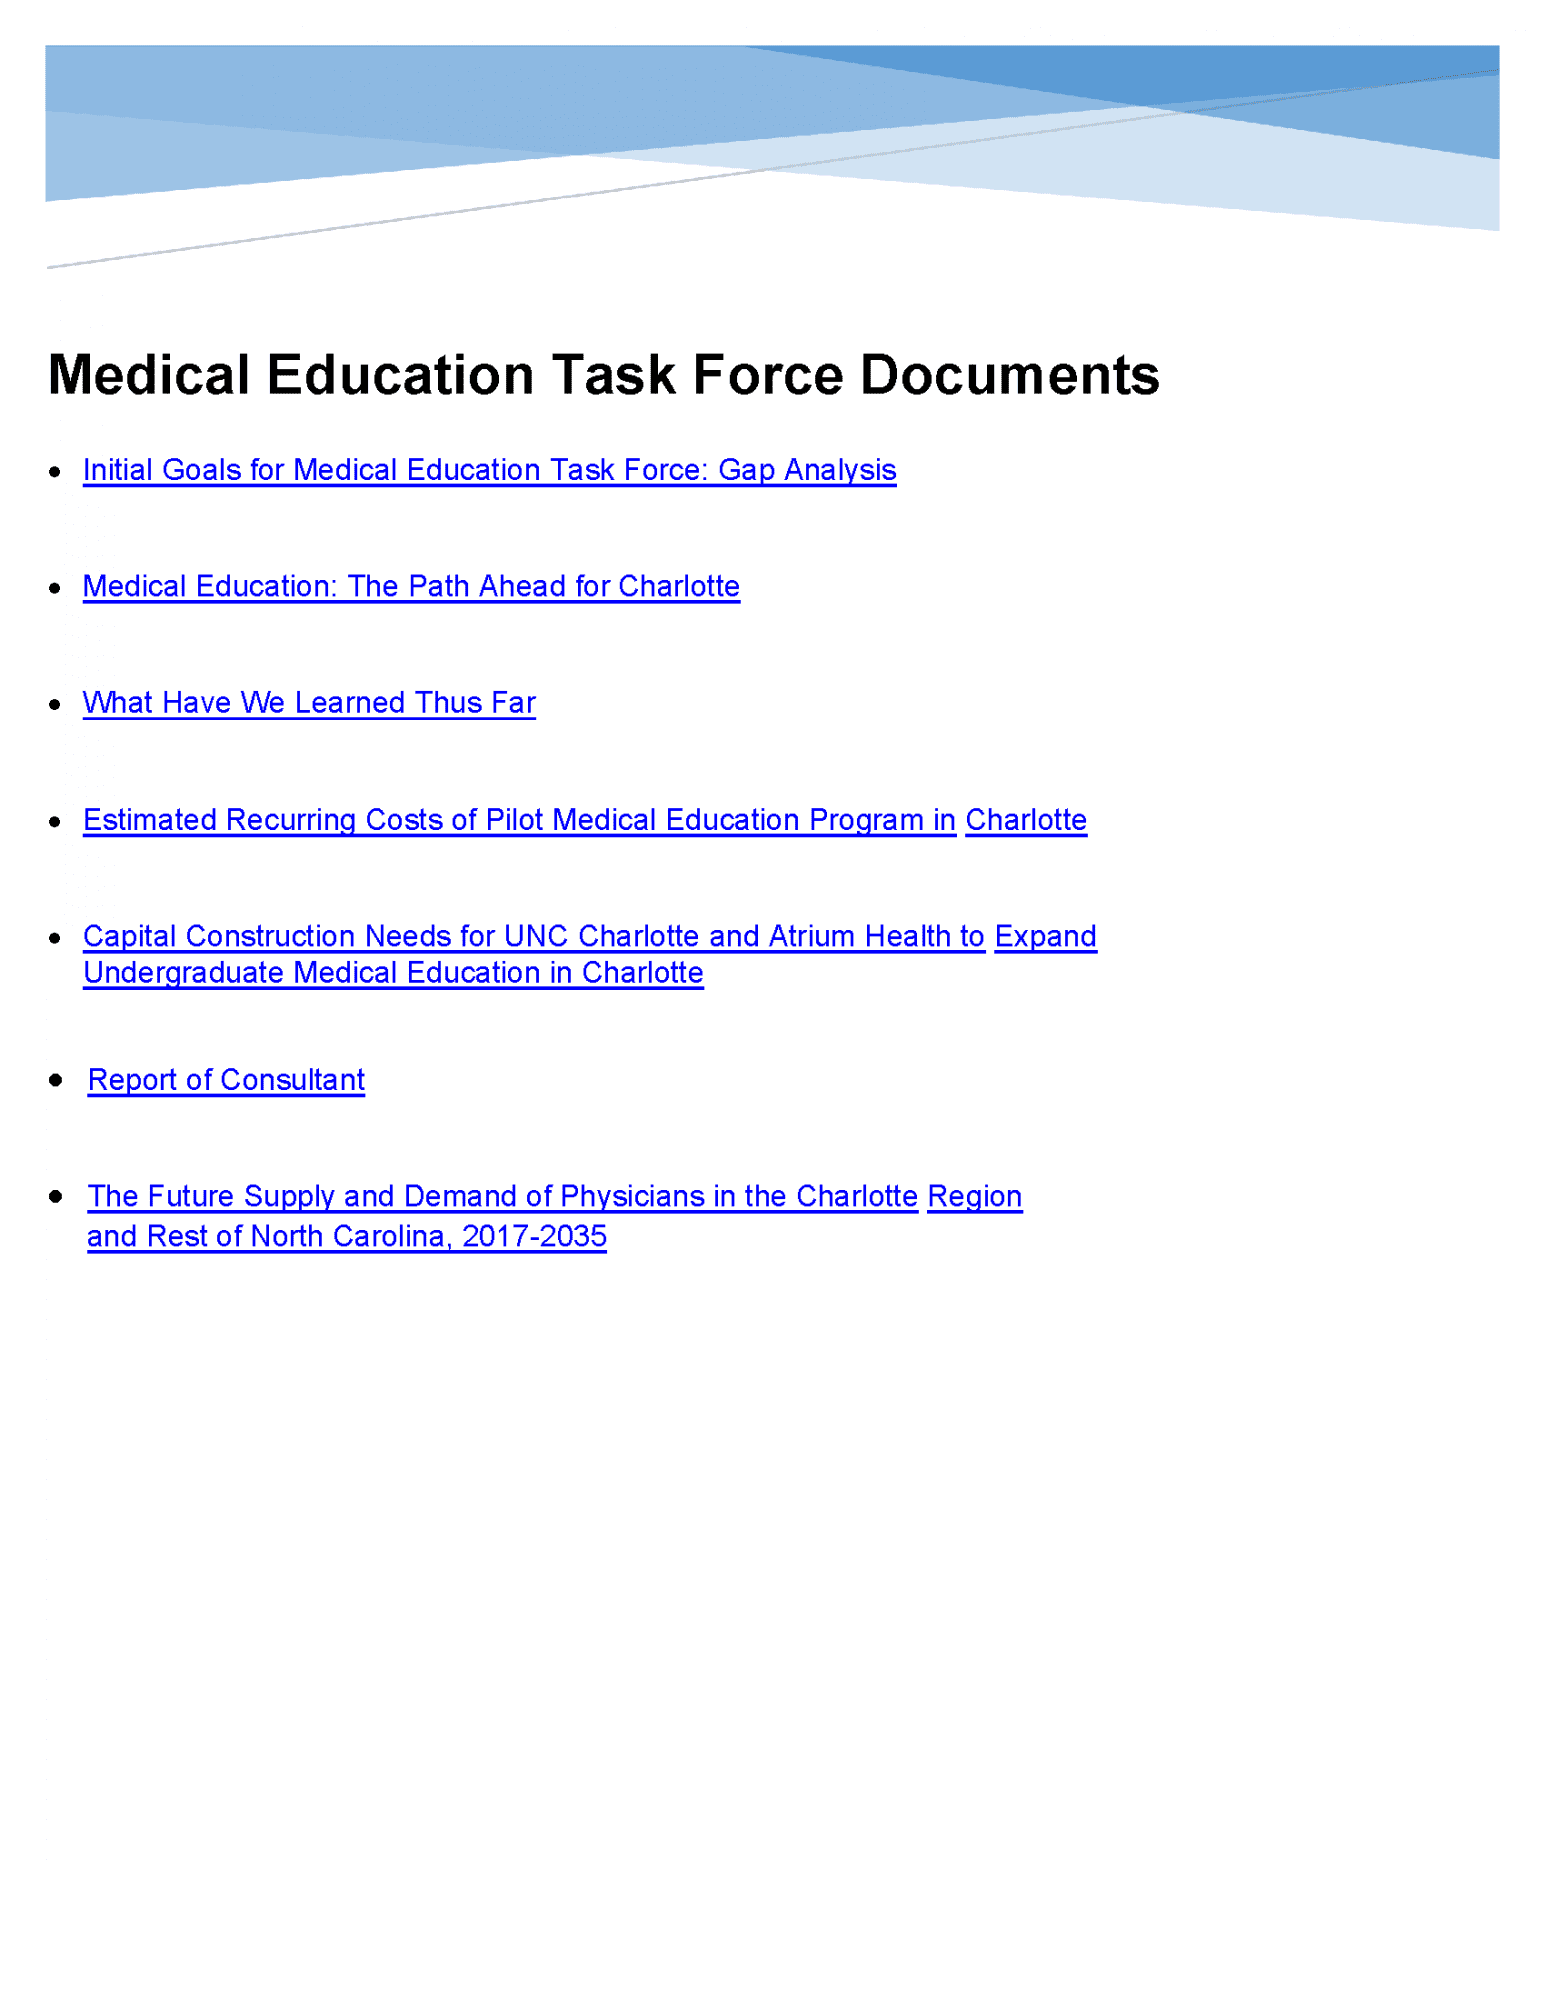 Medical Education Task Force Documents